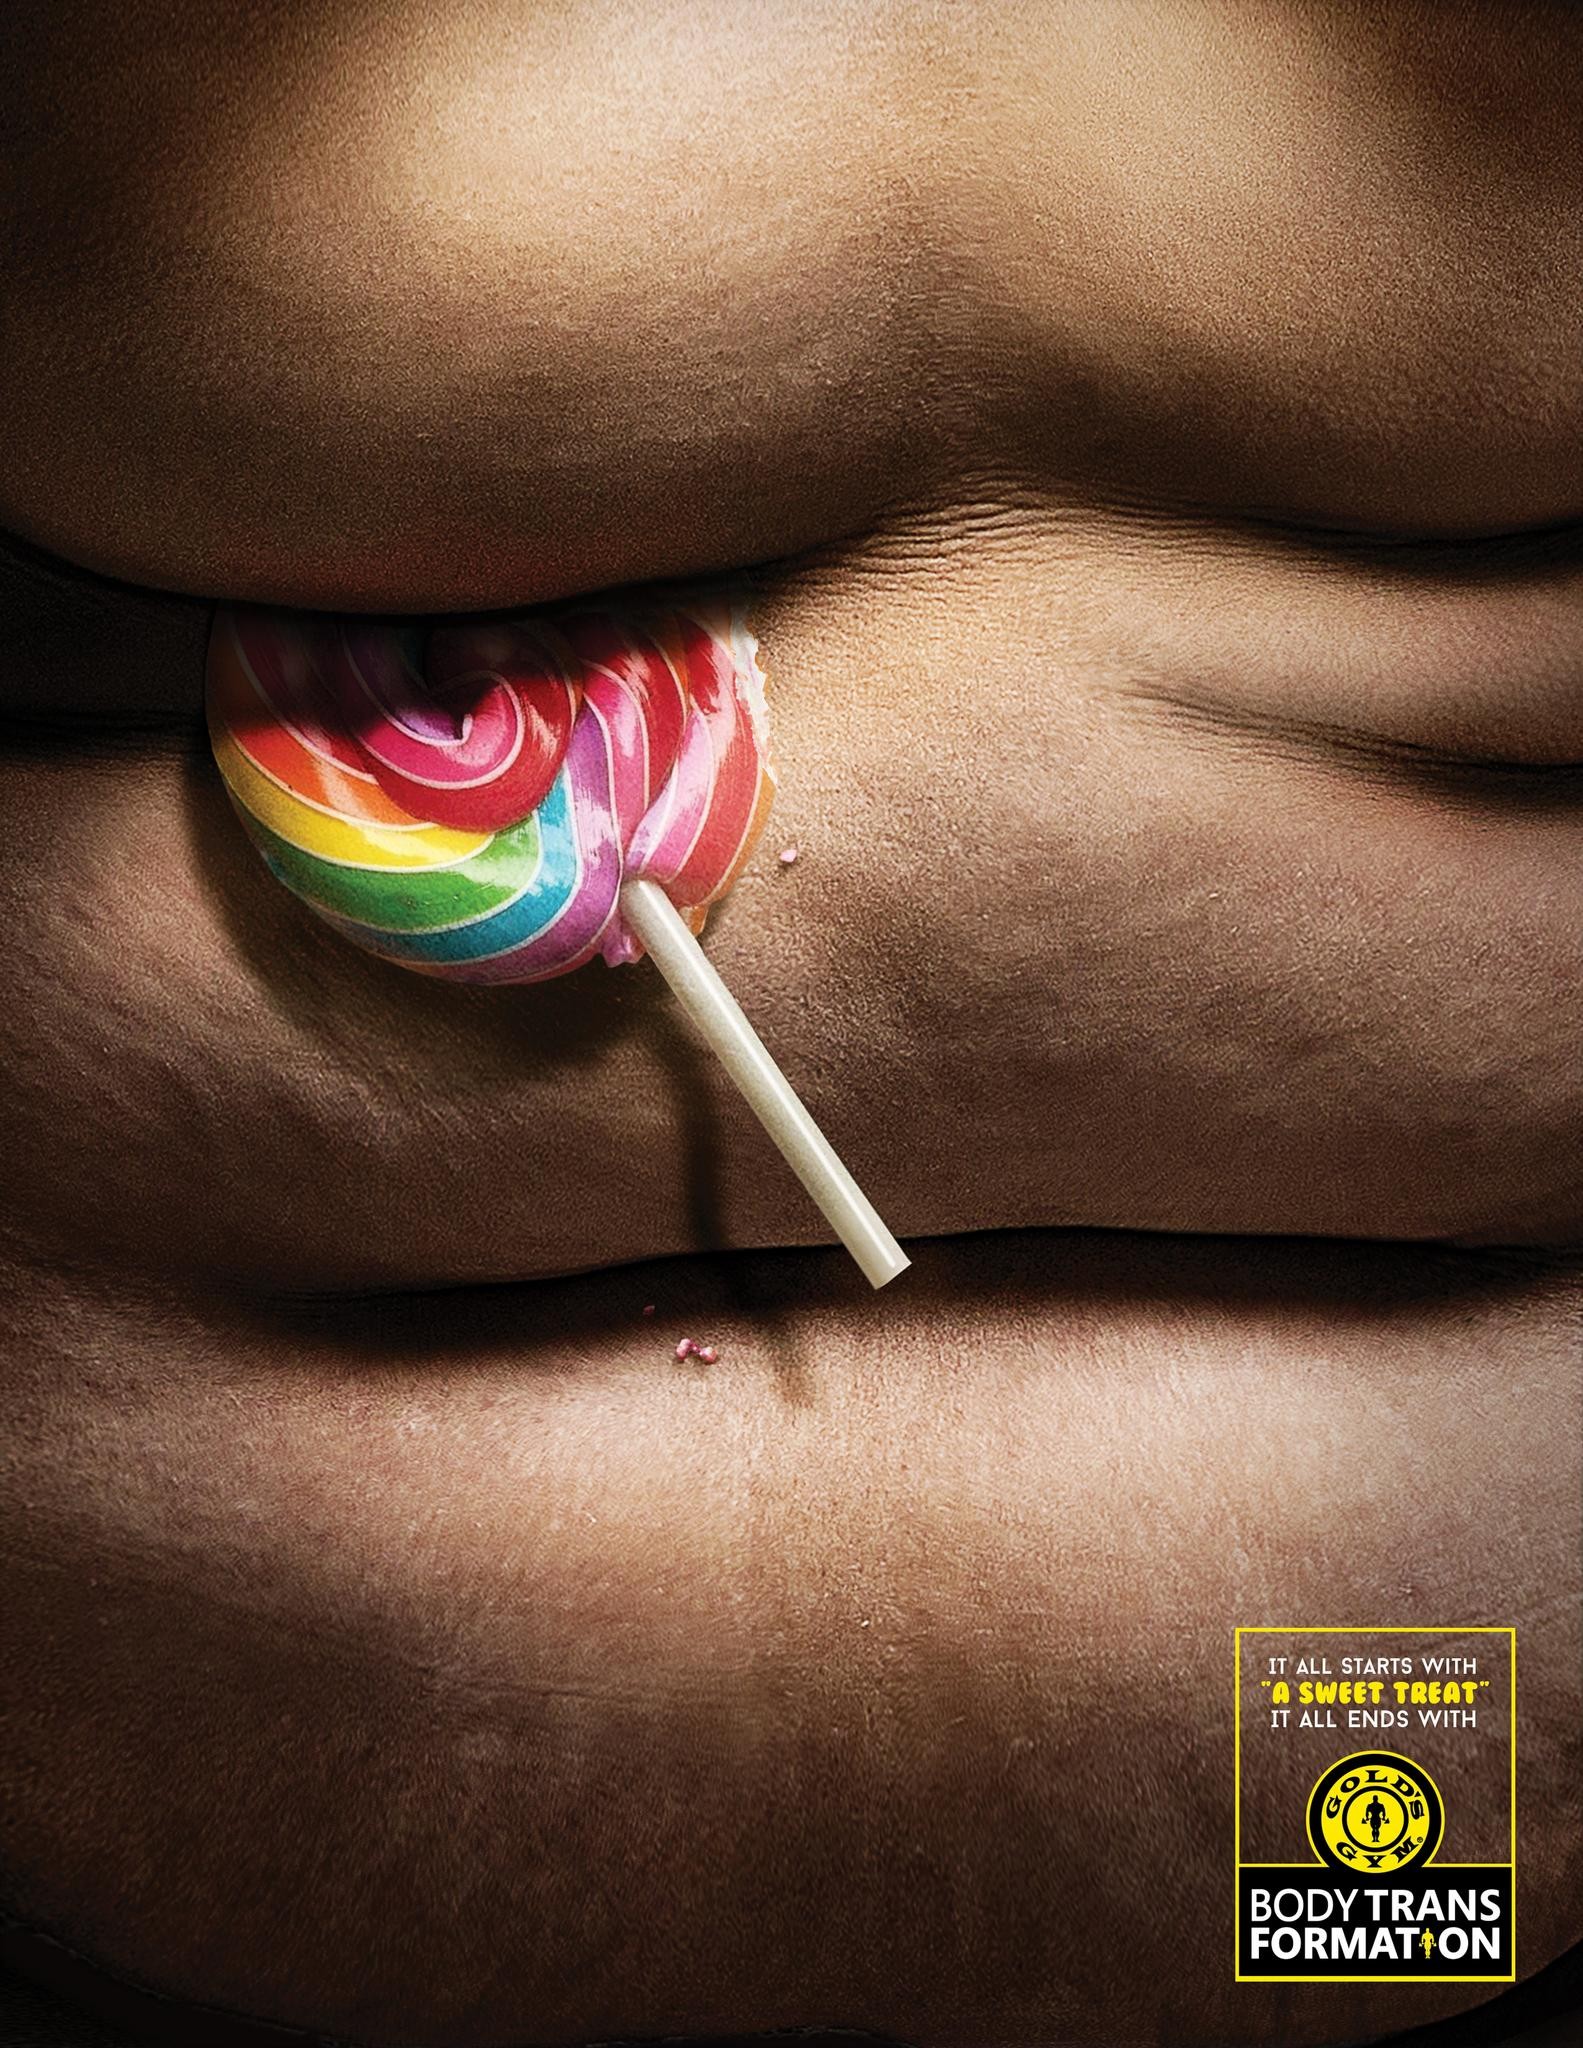 Lose to win - Gold's Gym - Lollipop